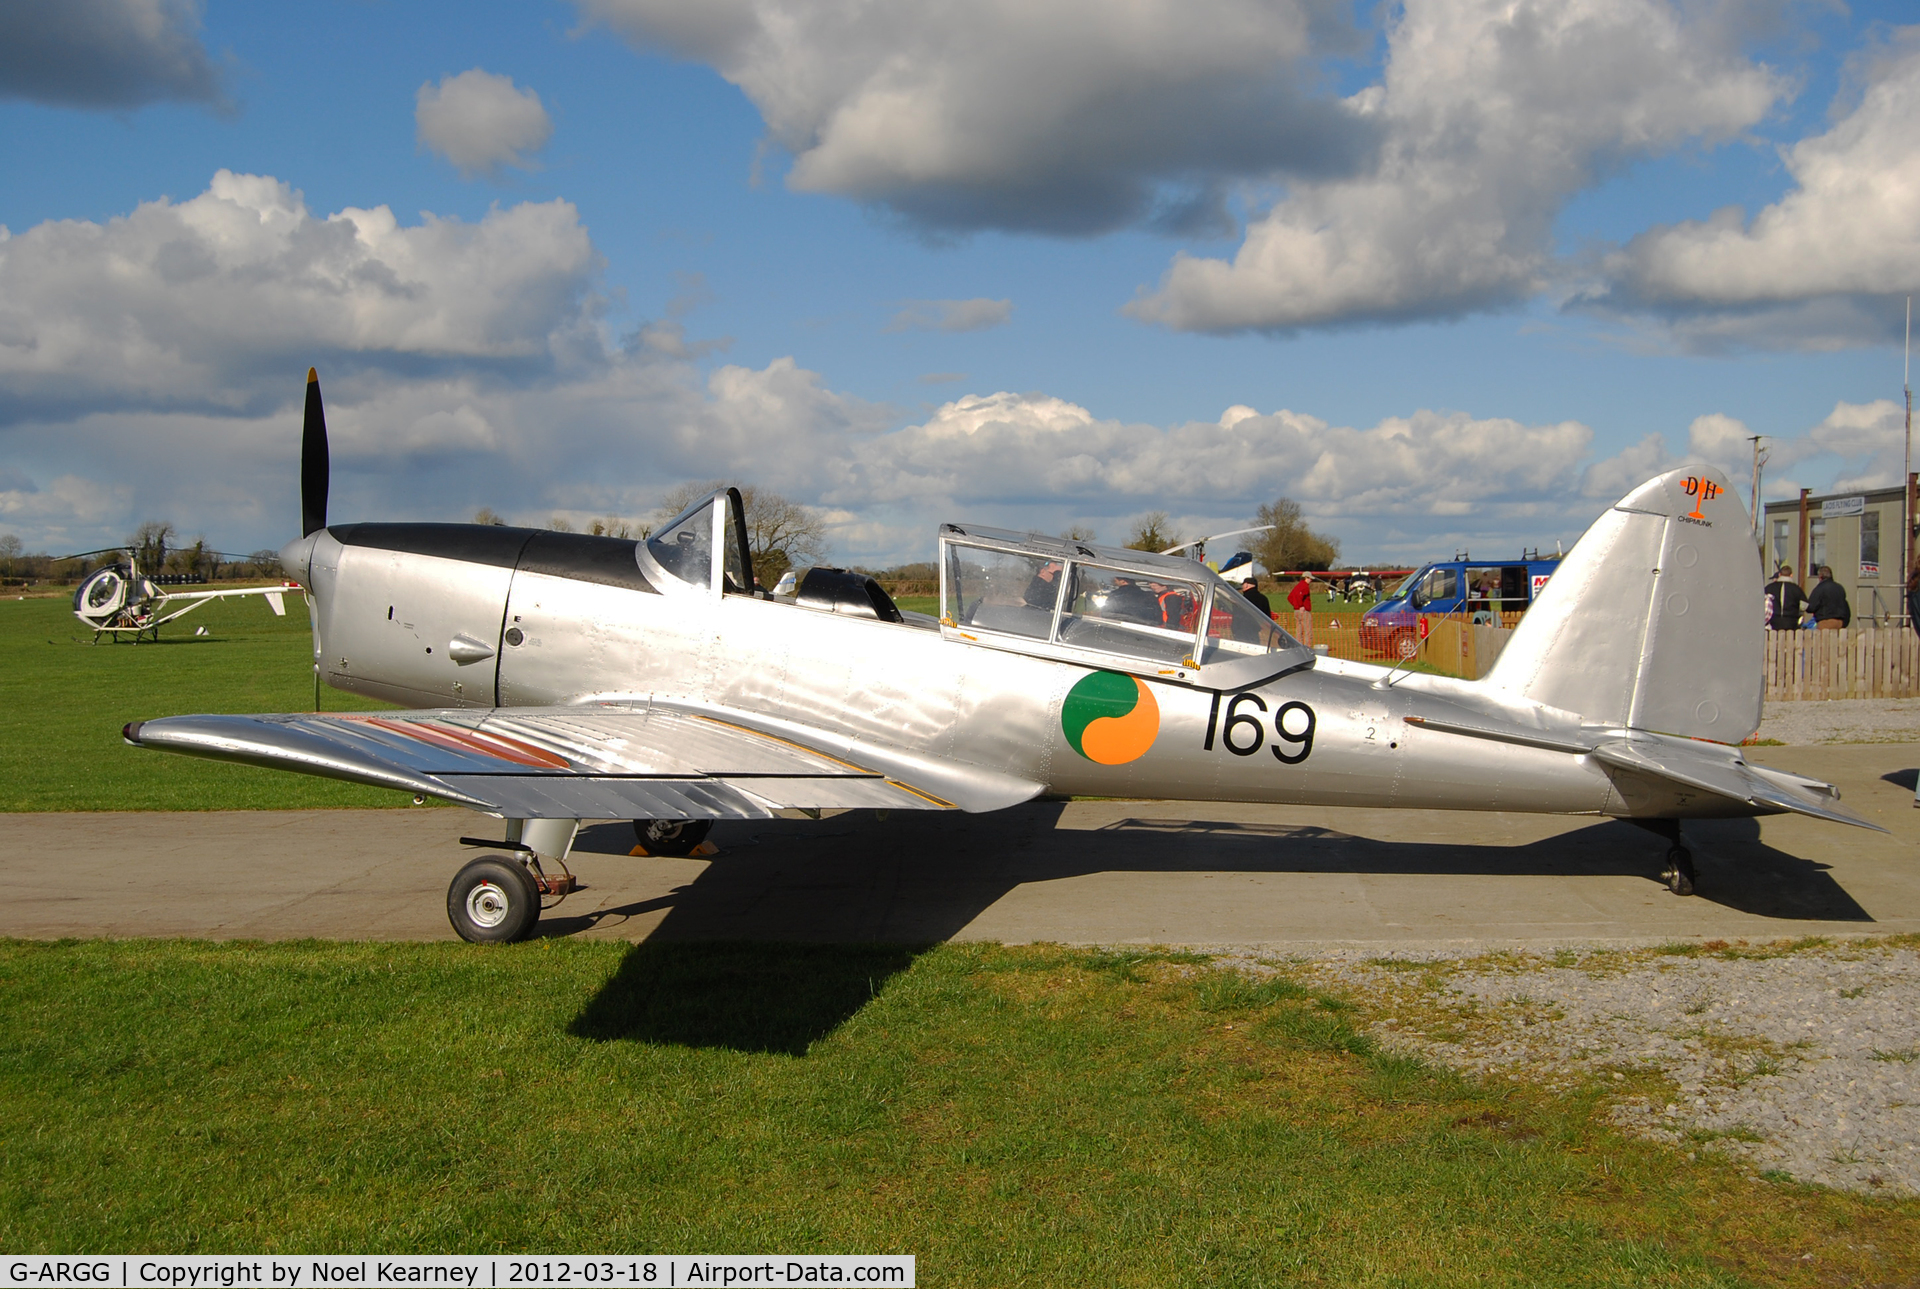 G-ARGG, 1951 De Havilland DHC-1 Chipmunk T.10 C/N C1/0247, Pictured at Limetree Airfield during 2012 Fly-in.